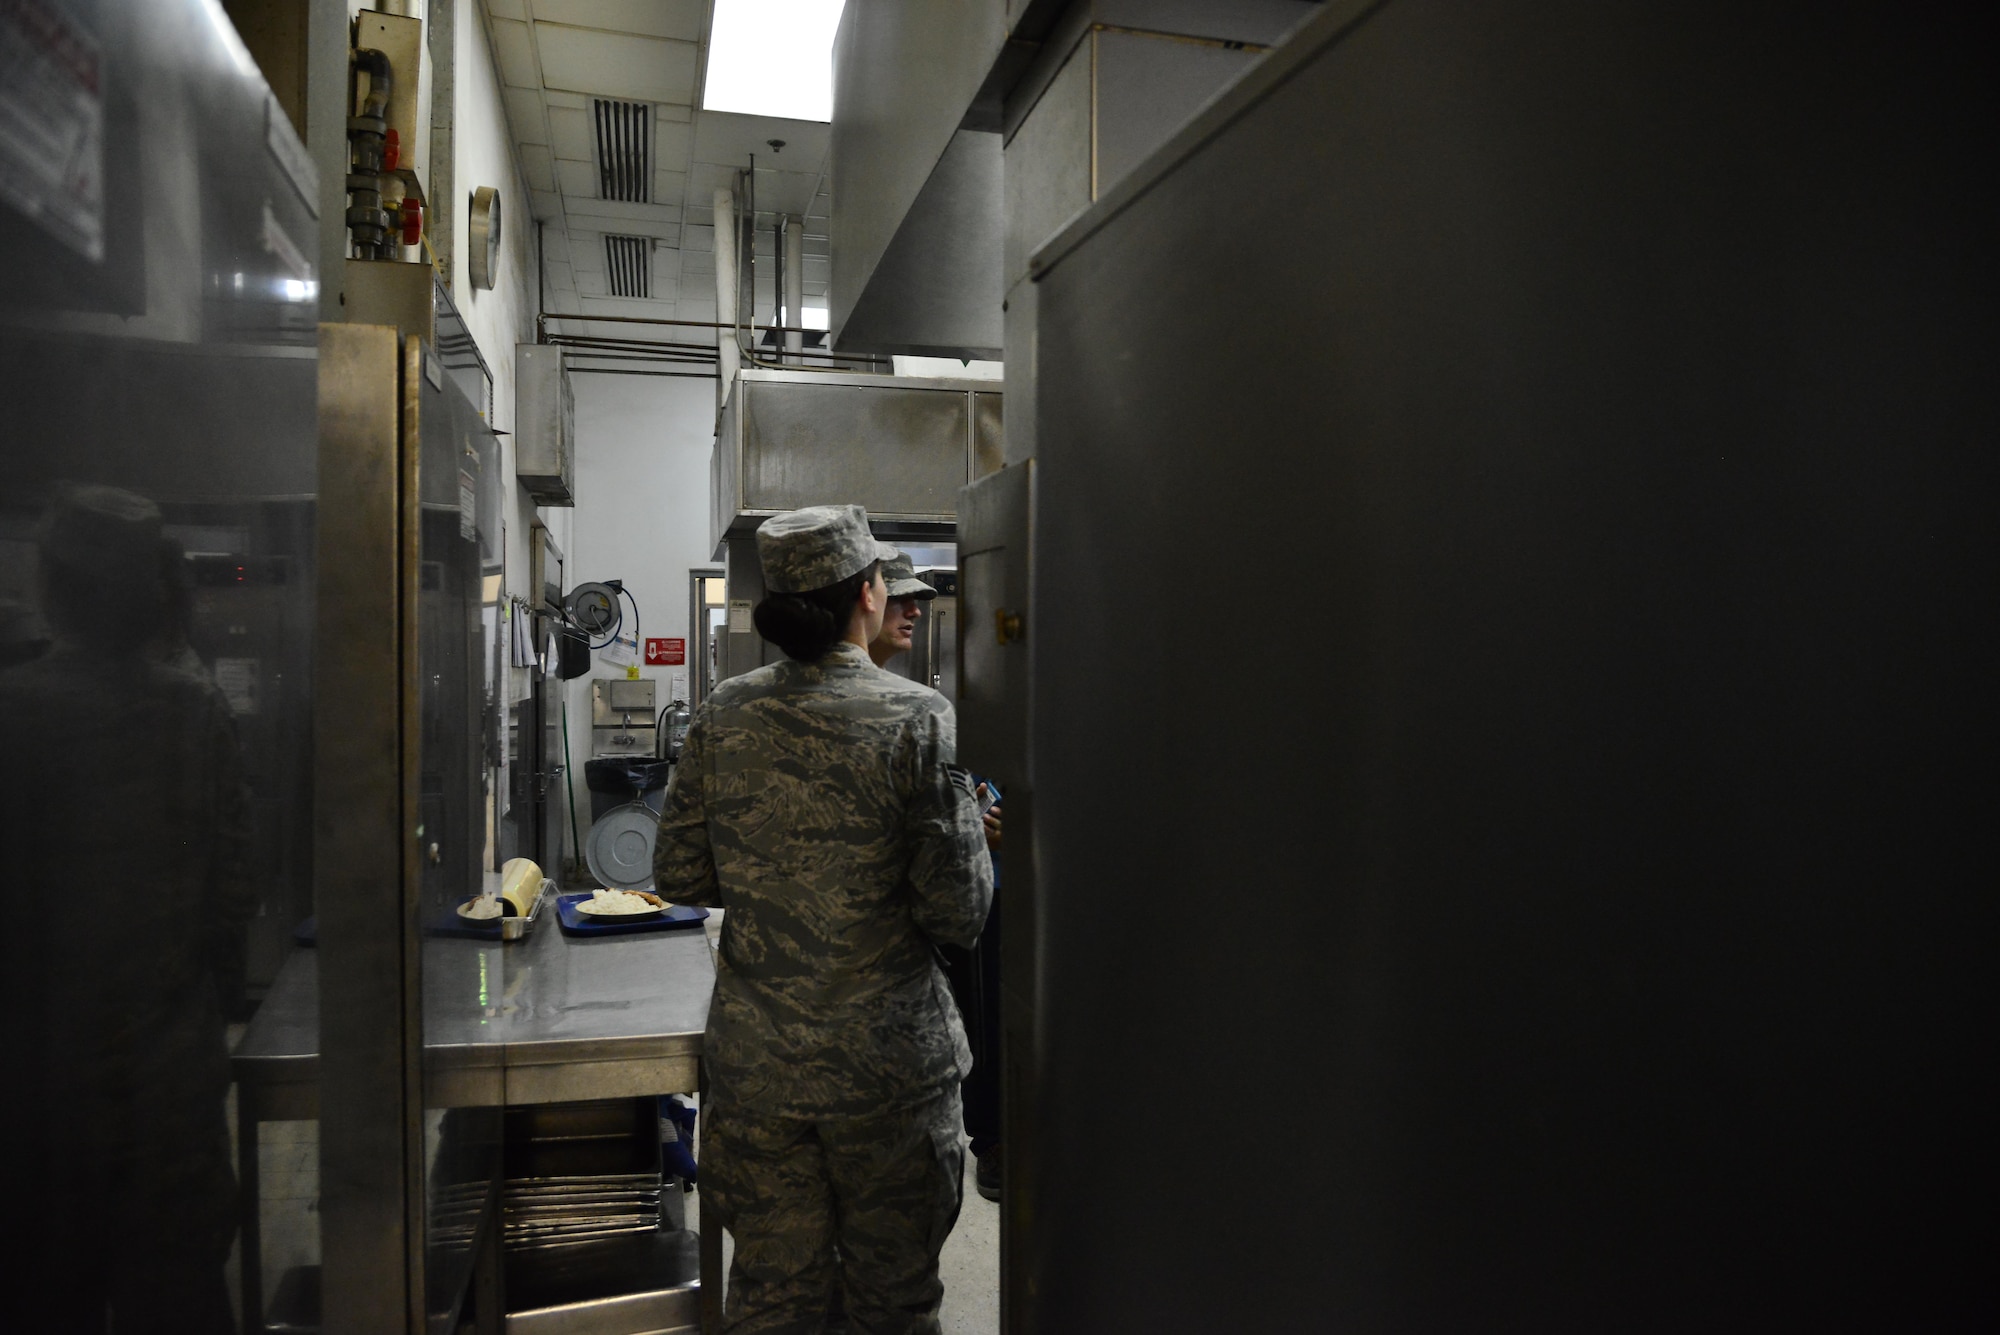 Senior Airman Leah Smith, 379th Expeditionary Medical Operations Support Squadron Bioenvironmental, walks through the kitchen of a dining facility inspecting the ventilation systems September 30, 2015 at Al Udeid Air Base, Qatar. (U.S. Air Force photo/Staff Sgt. Alexandre Montes)  